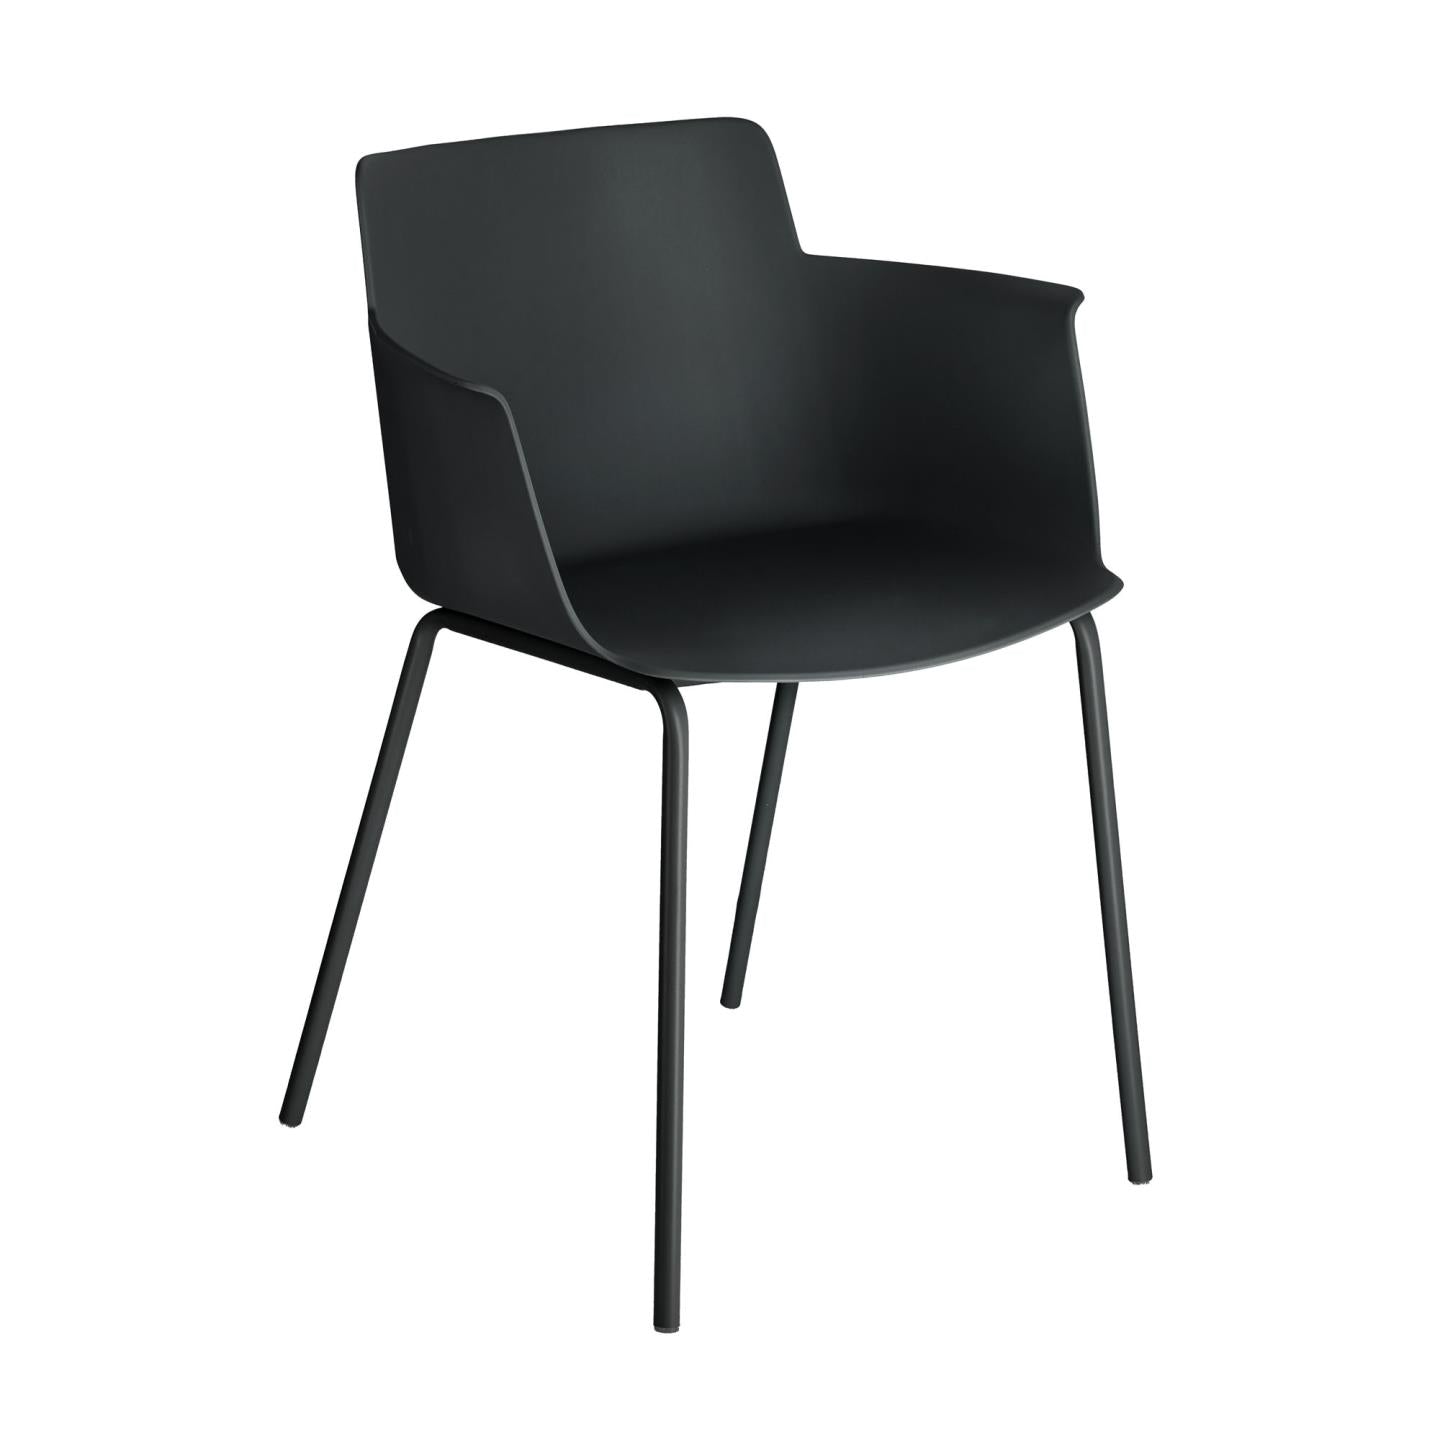 Hannia black chair with arms